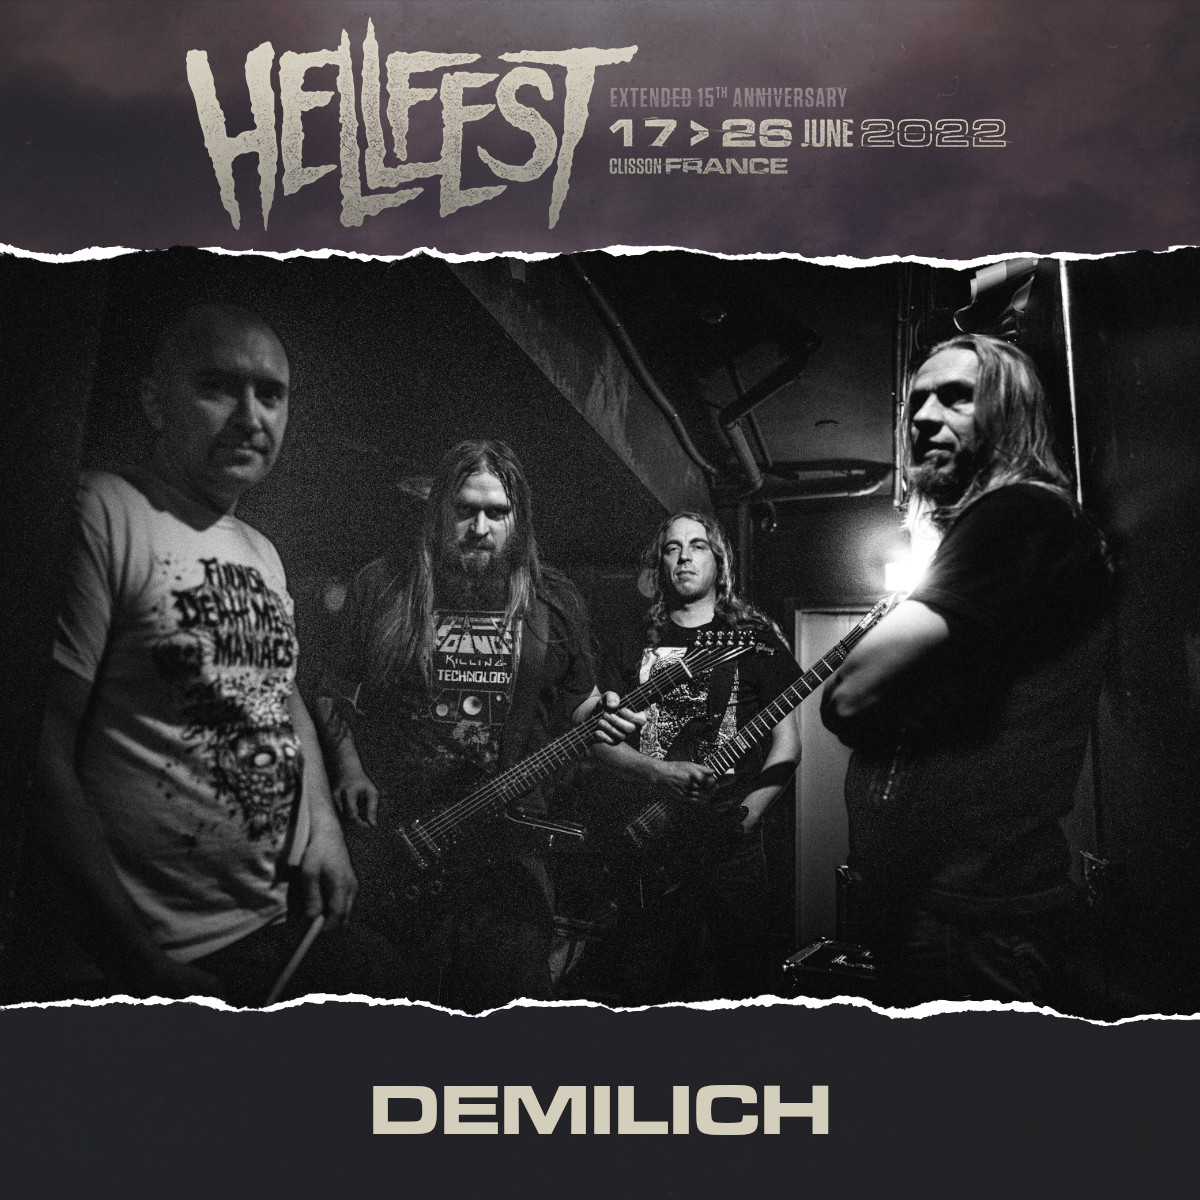 I cannot even understand the utter joy Lars Ulrich must be feeling now. He will be able to play together the same day with mighty Demilich! Read more at demilich.band/hellfest-2022-… #Demilich #Hellfest #LarsUlrich #SamJamsen #CopyrightInfringement #DeathMetal #OSDM #FinnishMusic